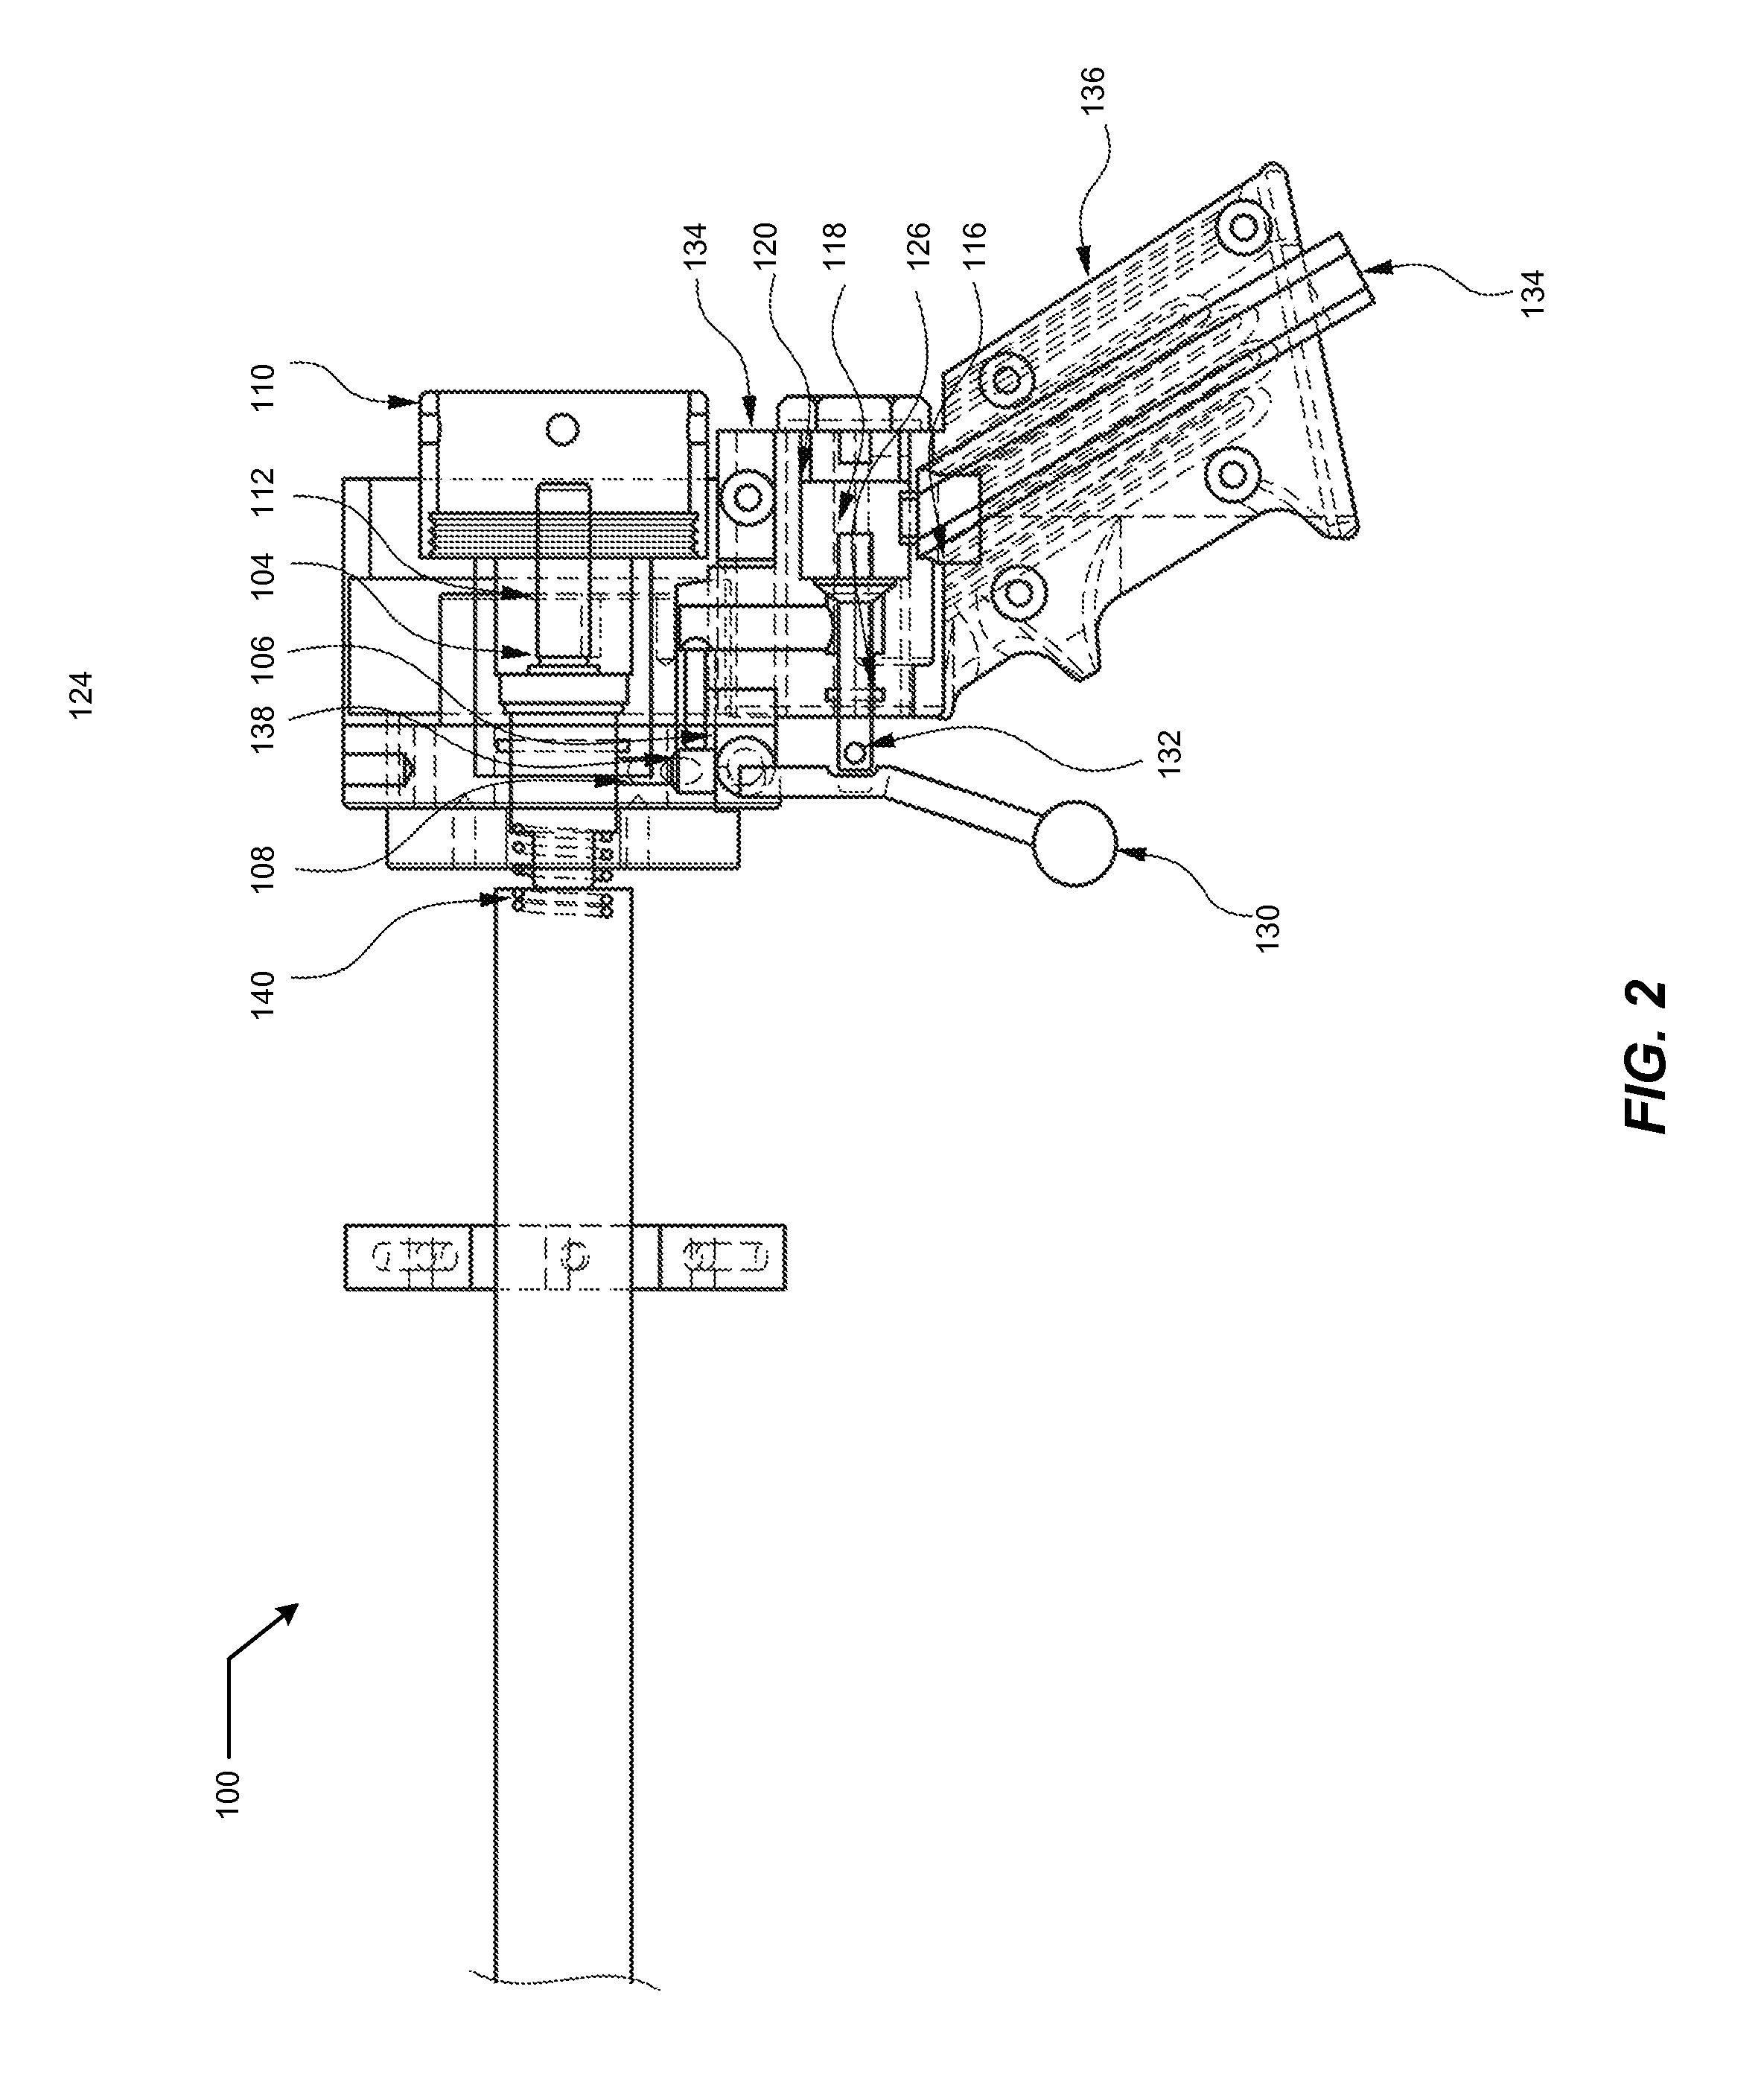 Prosthesis positioning systems and methods